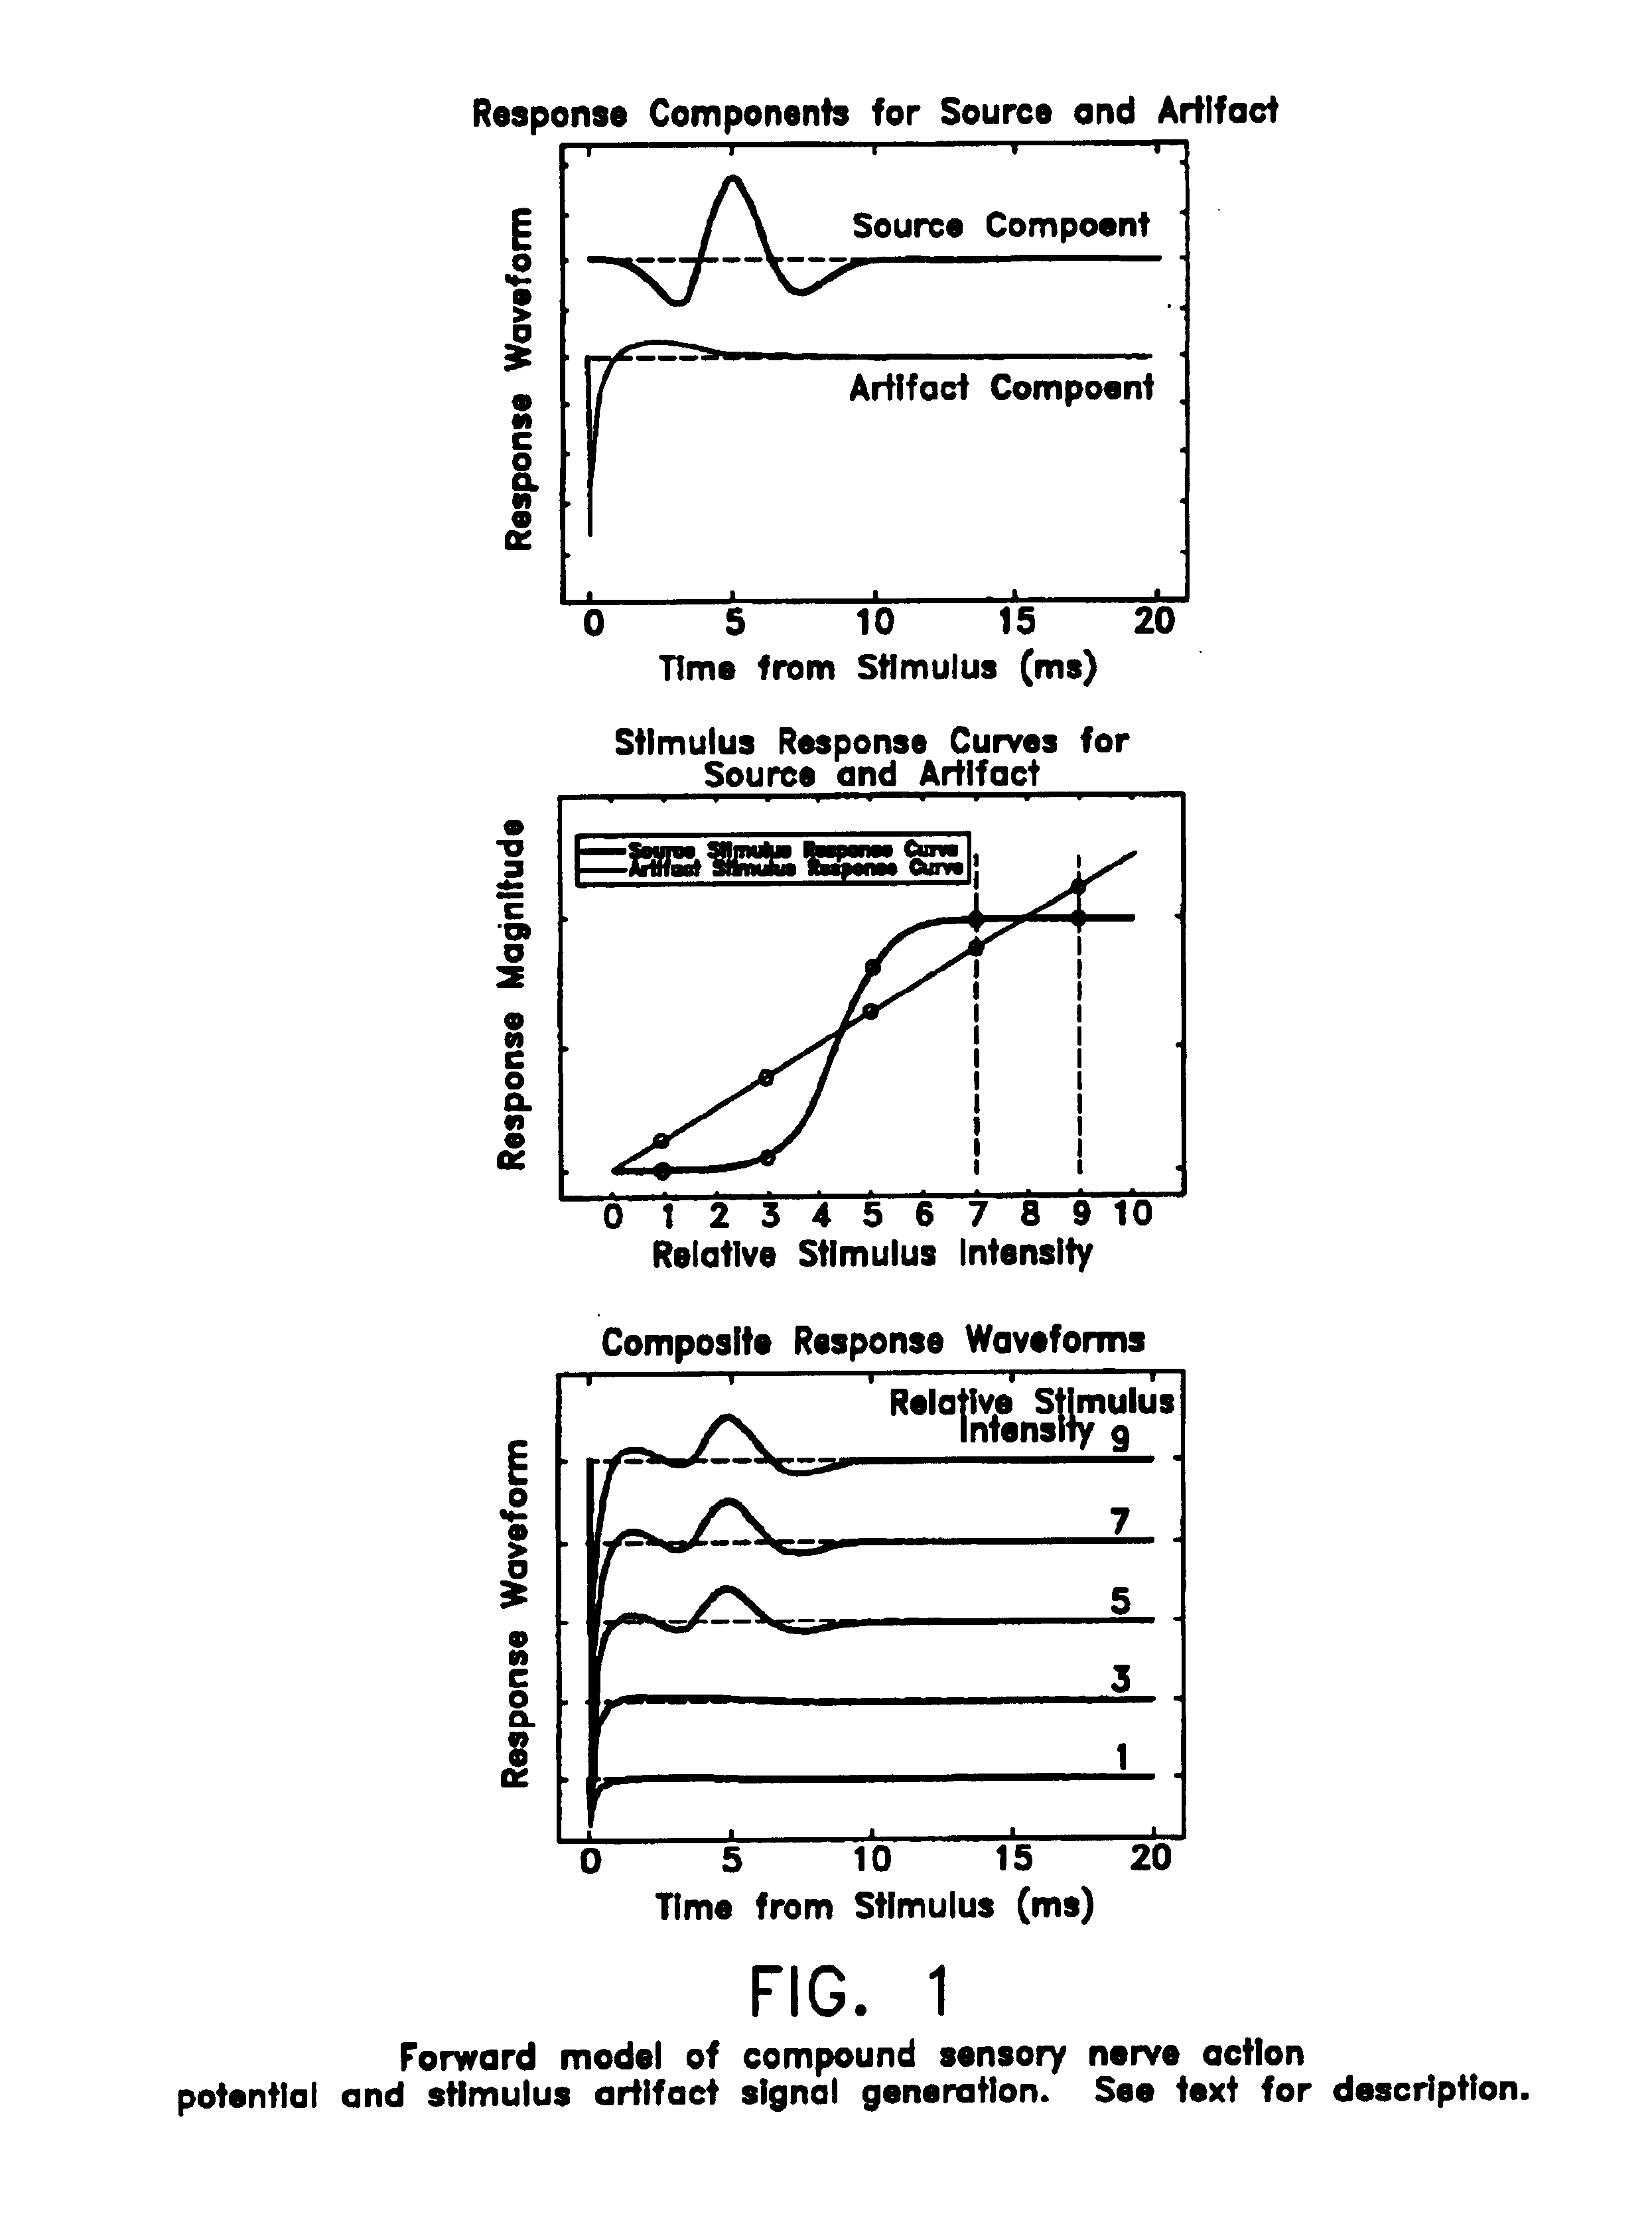 Method and apparatus for identifying constituent signal components from a plurality of evoked physiological composite signals